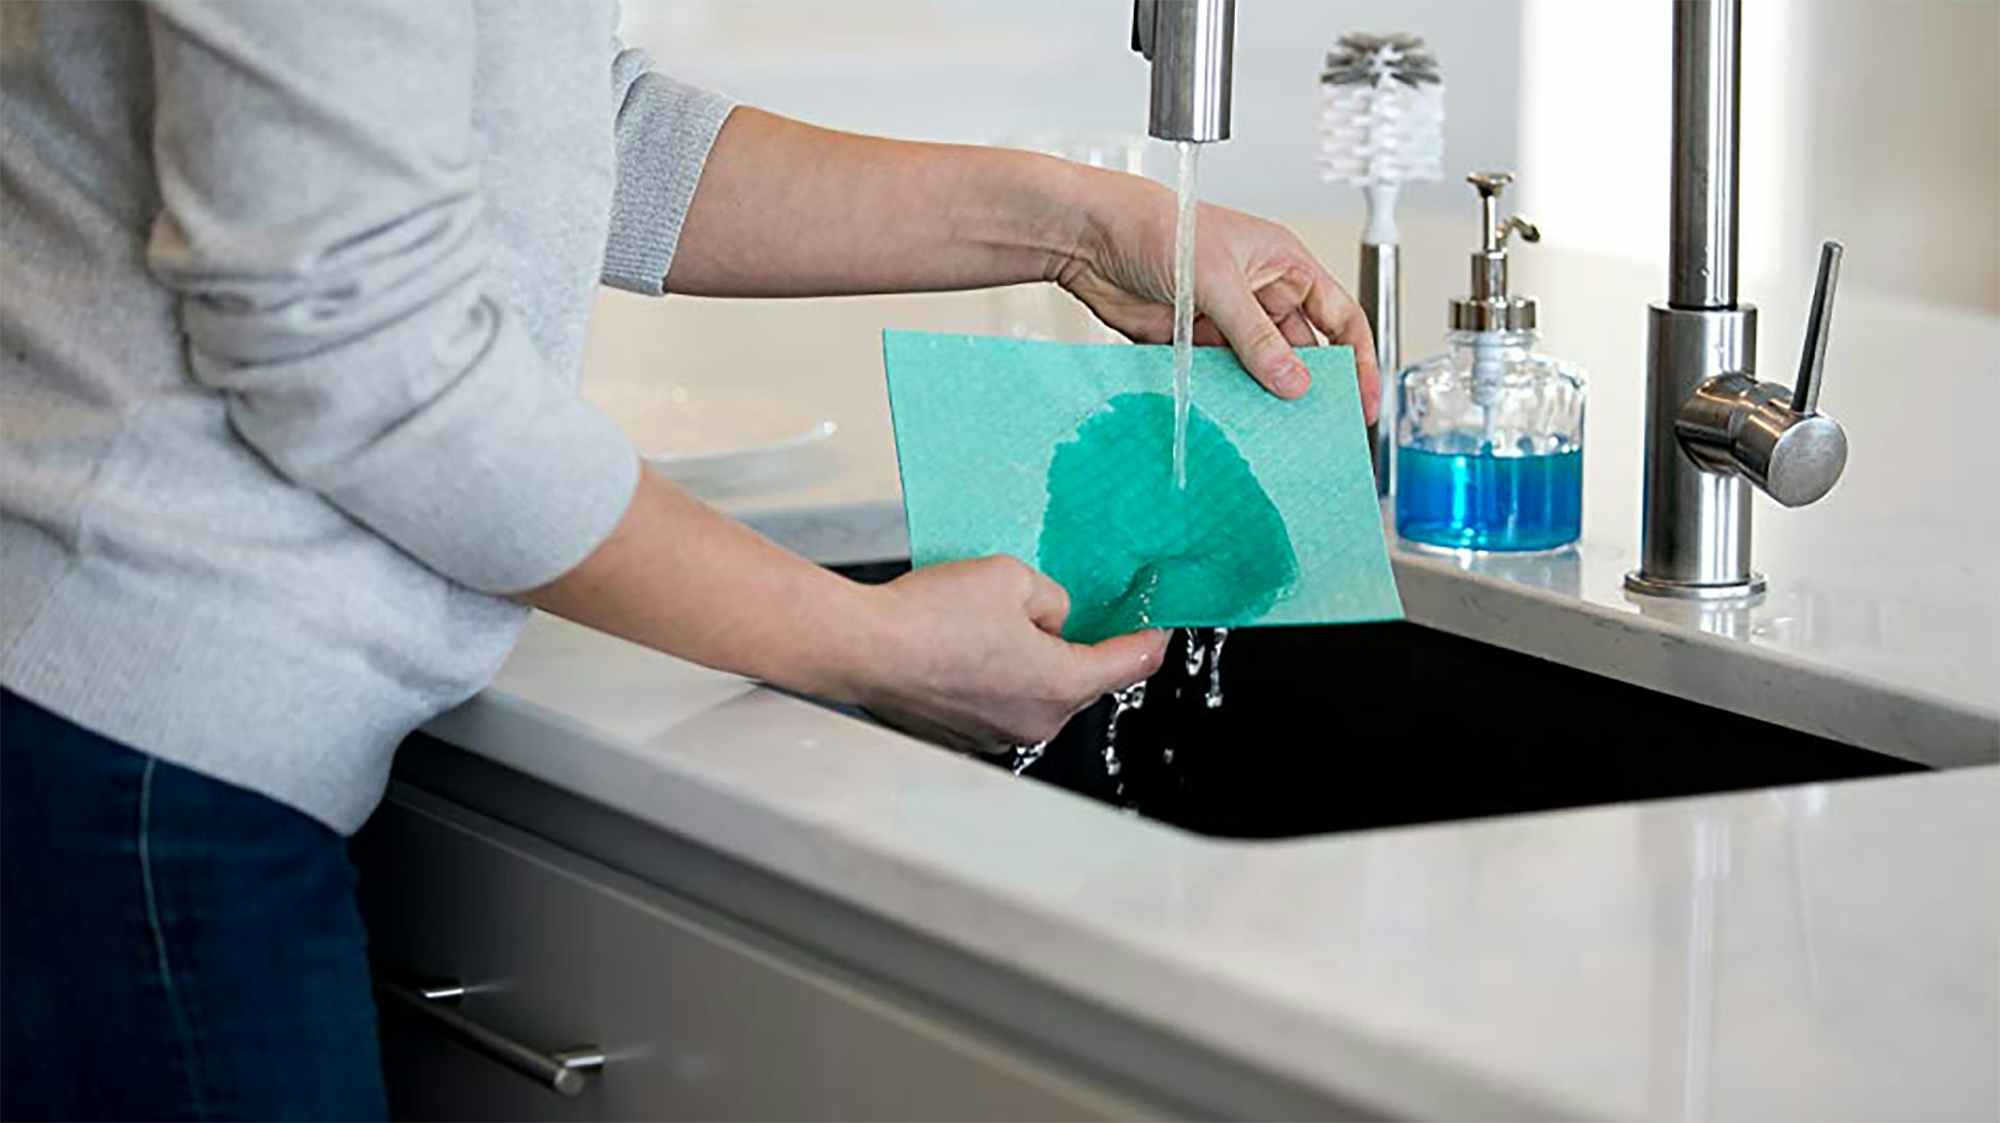 A woman rinsing a dish cloth under a kitchen faucet